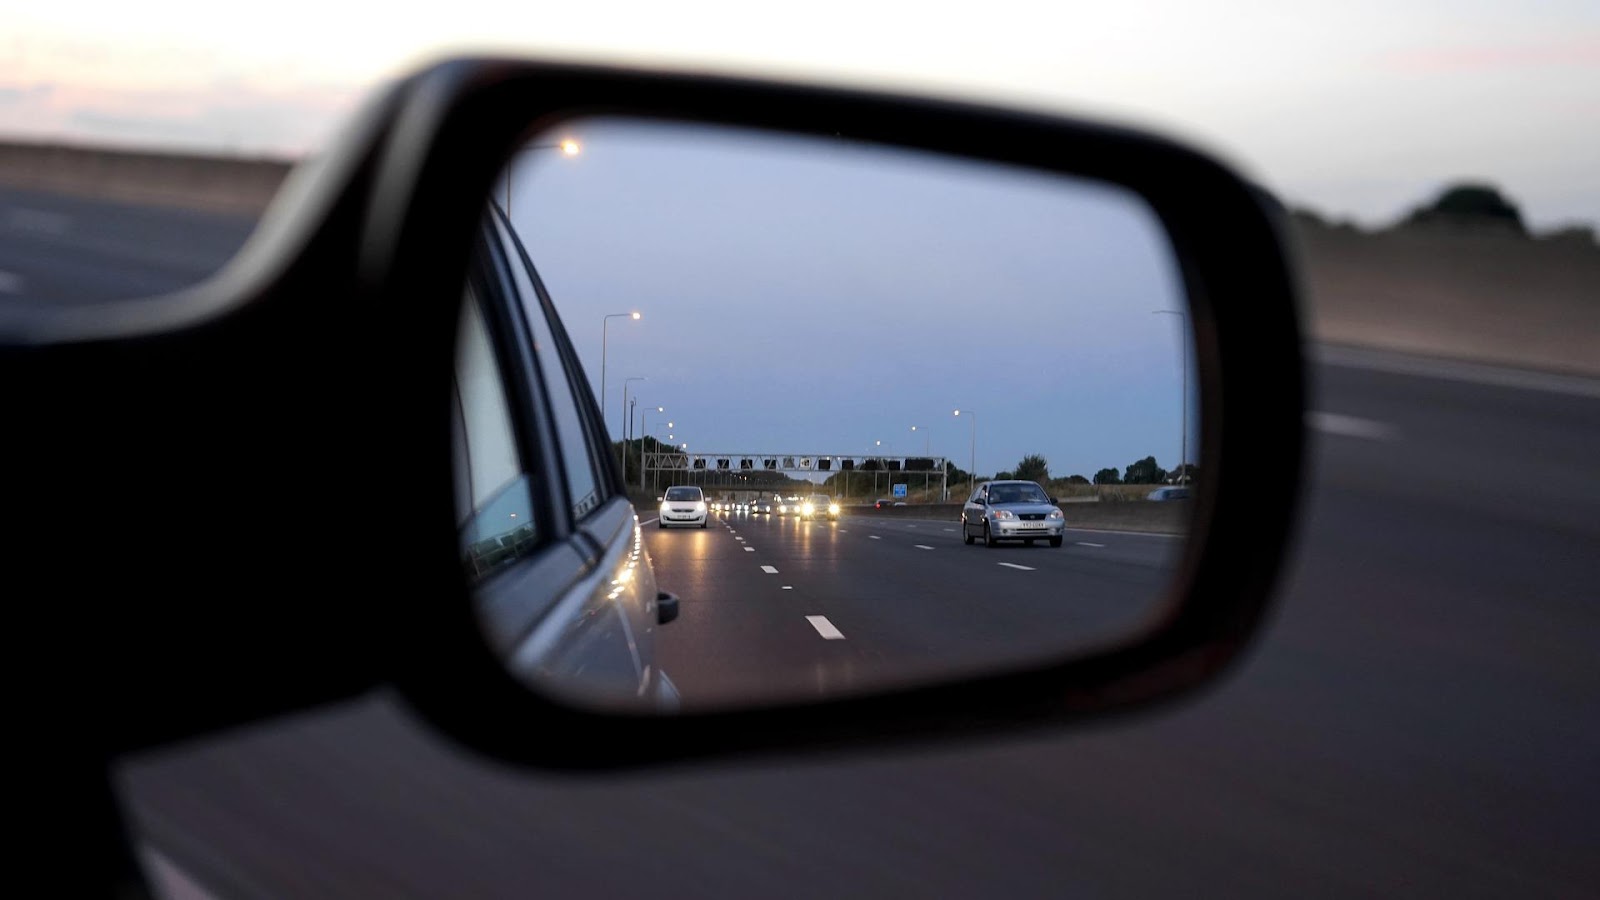 A picture containing mirror, car mirror, object, carDescription automatically generated